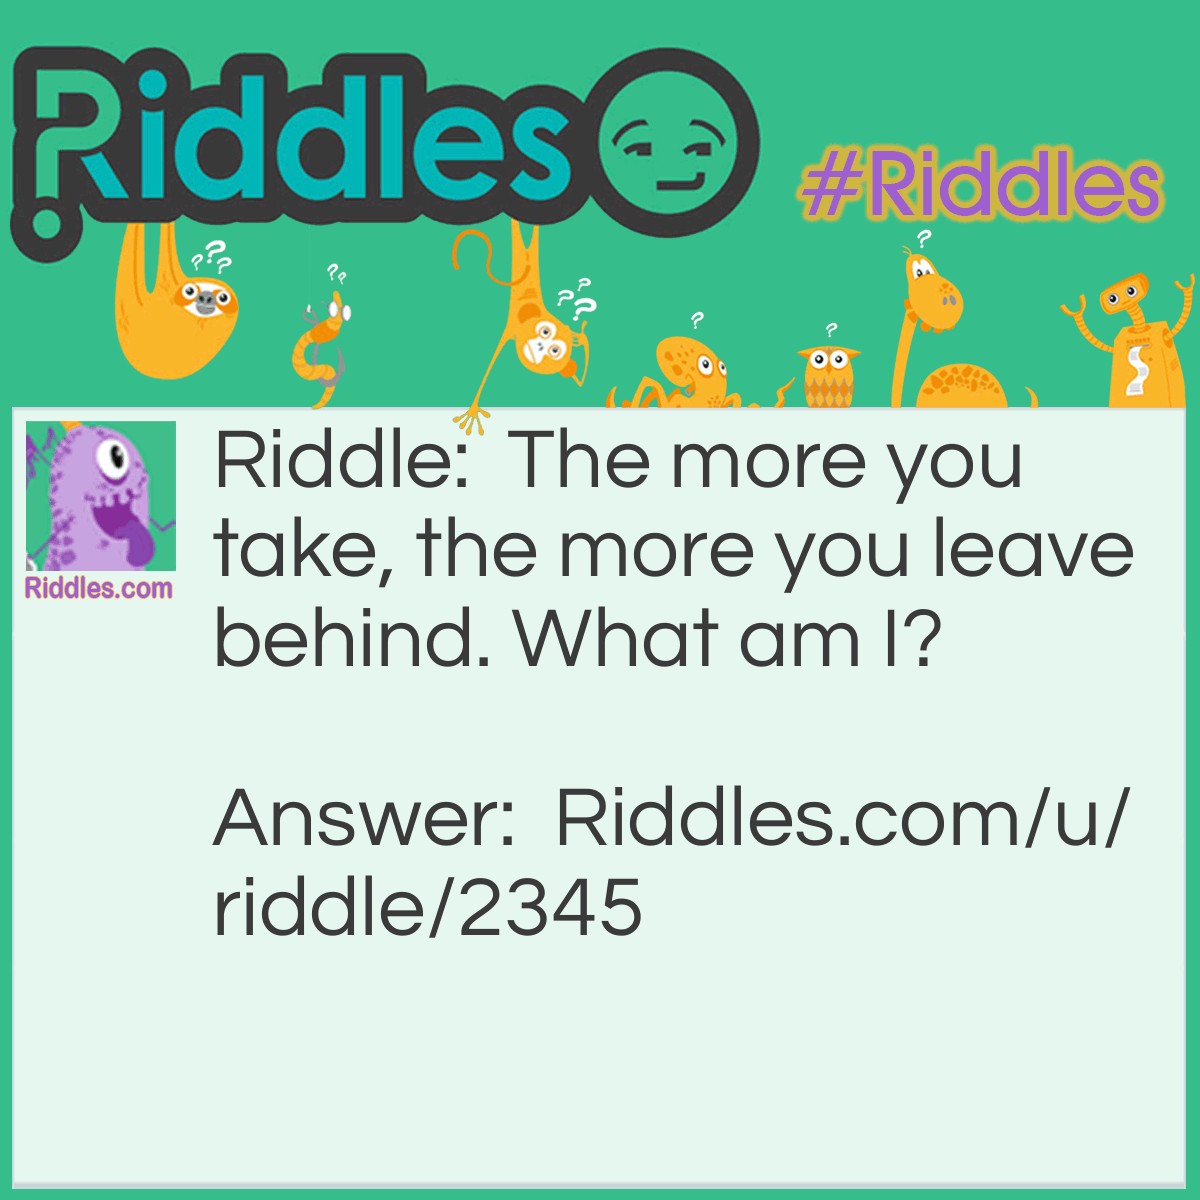 Riddle: The more you take, the more you leave behind. <a title="What Am I Riddles" href="../../../what-am-i">What am I</a>? Answer: Footsteps.